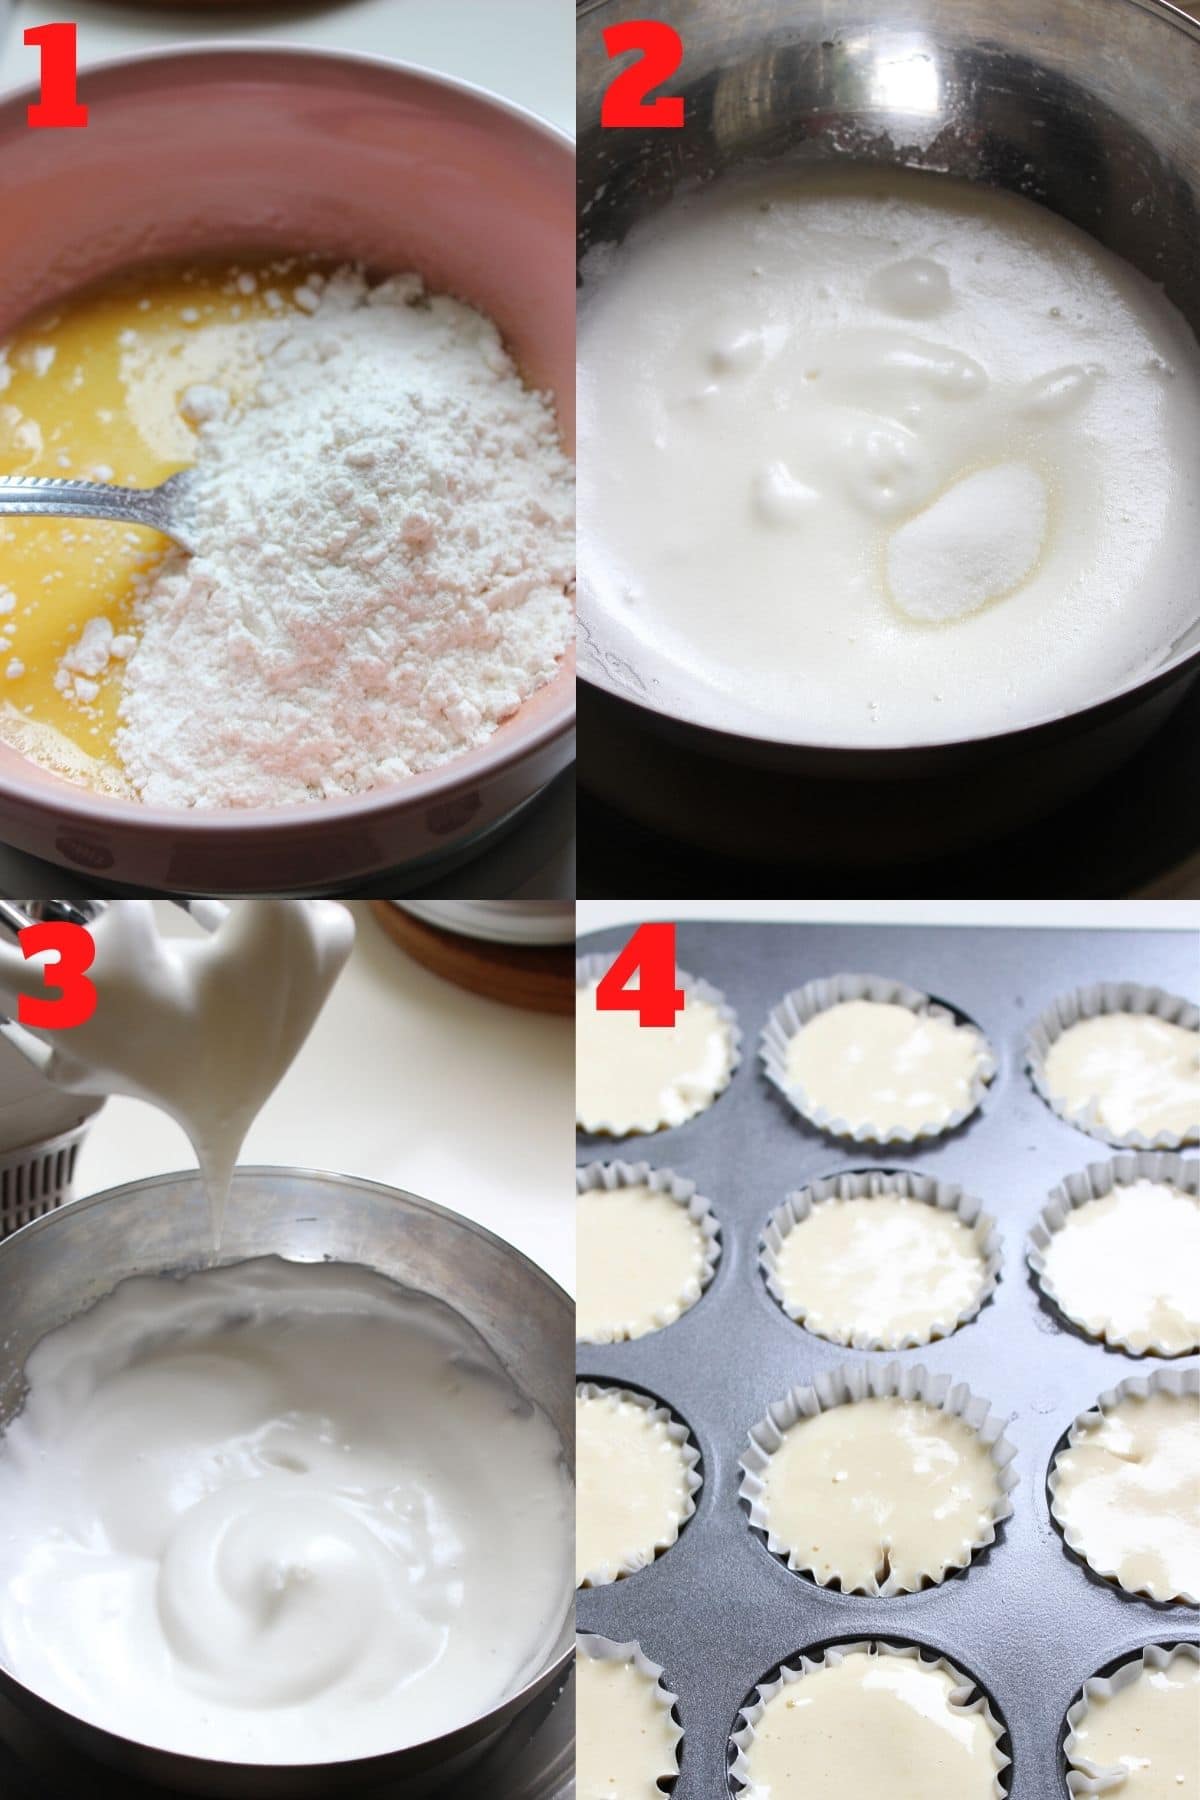 Step by step process of how to make mini vanilla cupcakes.